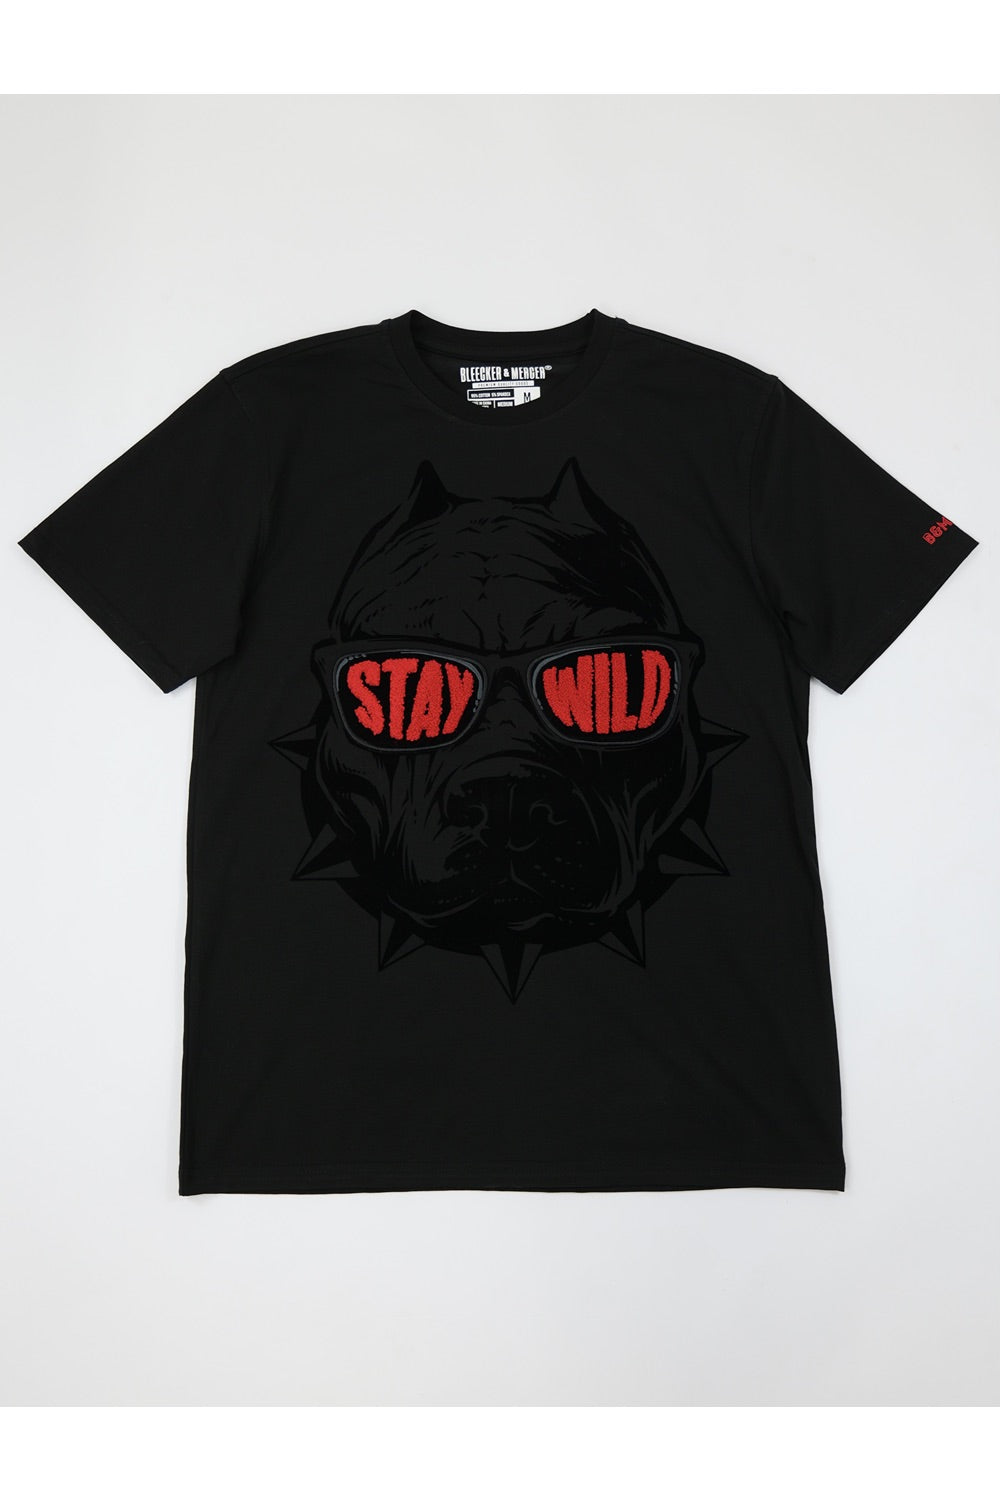 Graphic Tees - Stay Wild T - Shirts